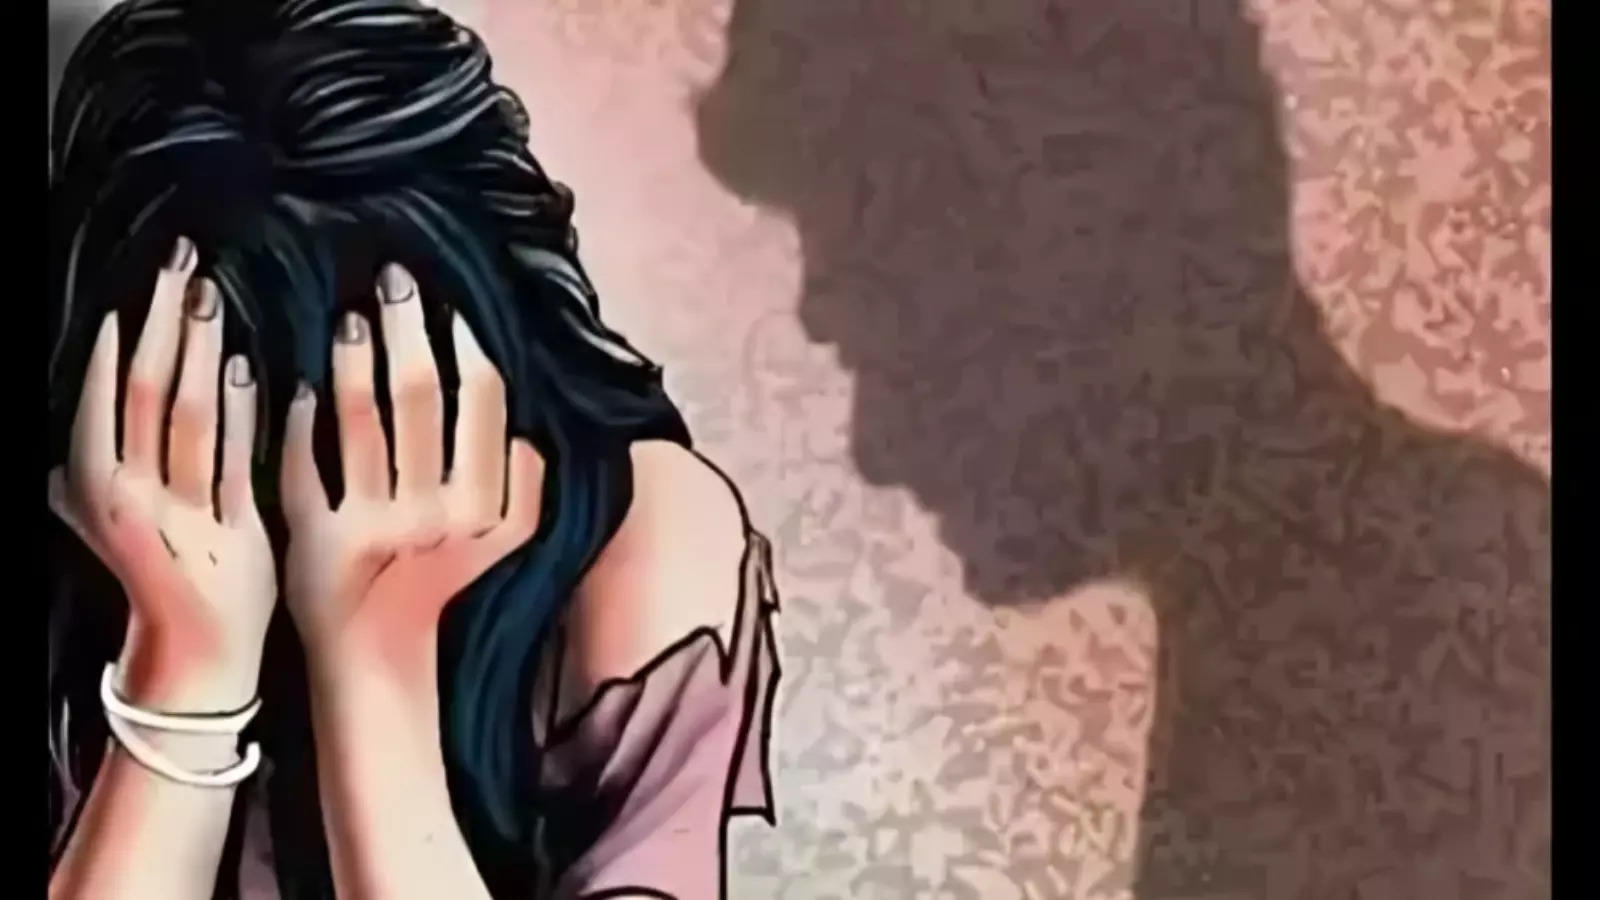 Friend takes minor to hotel in Faridabad, rapes her; held with 2 others